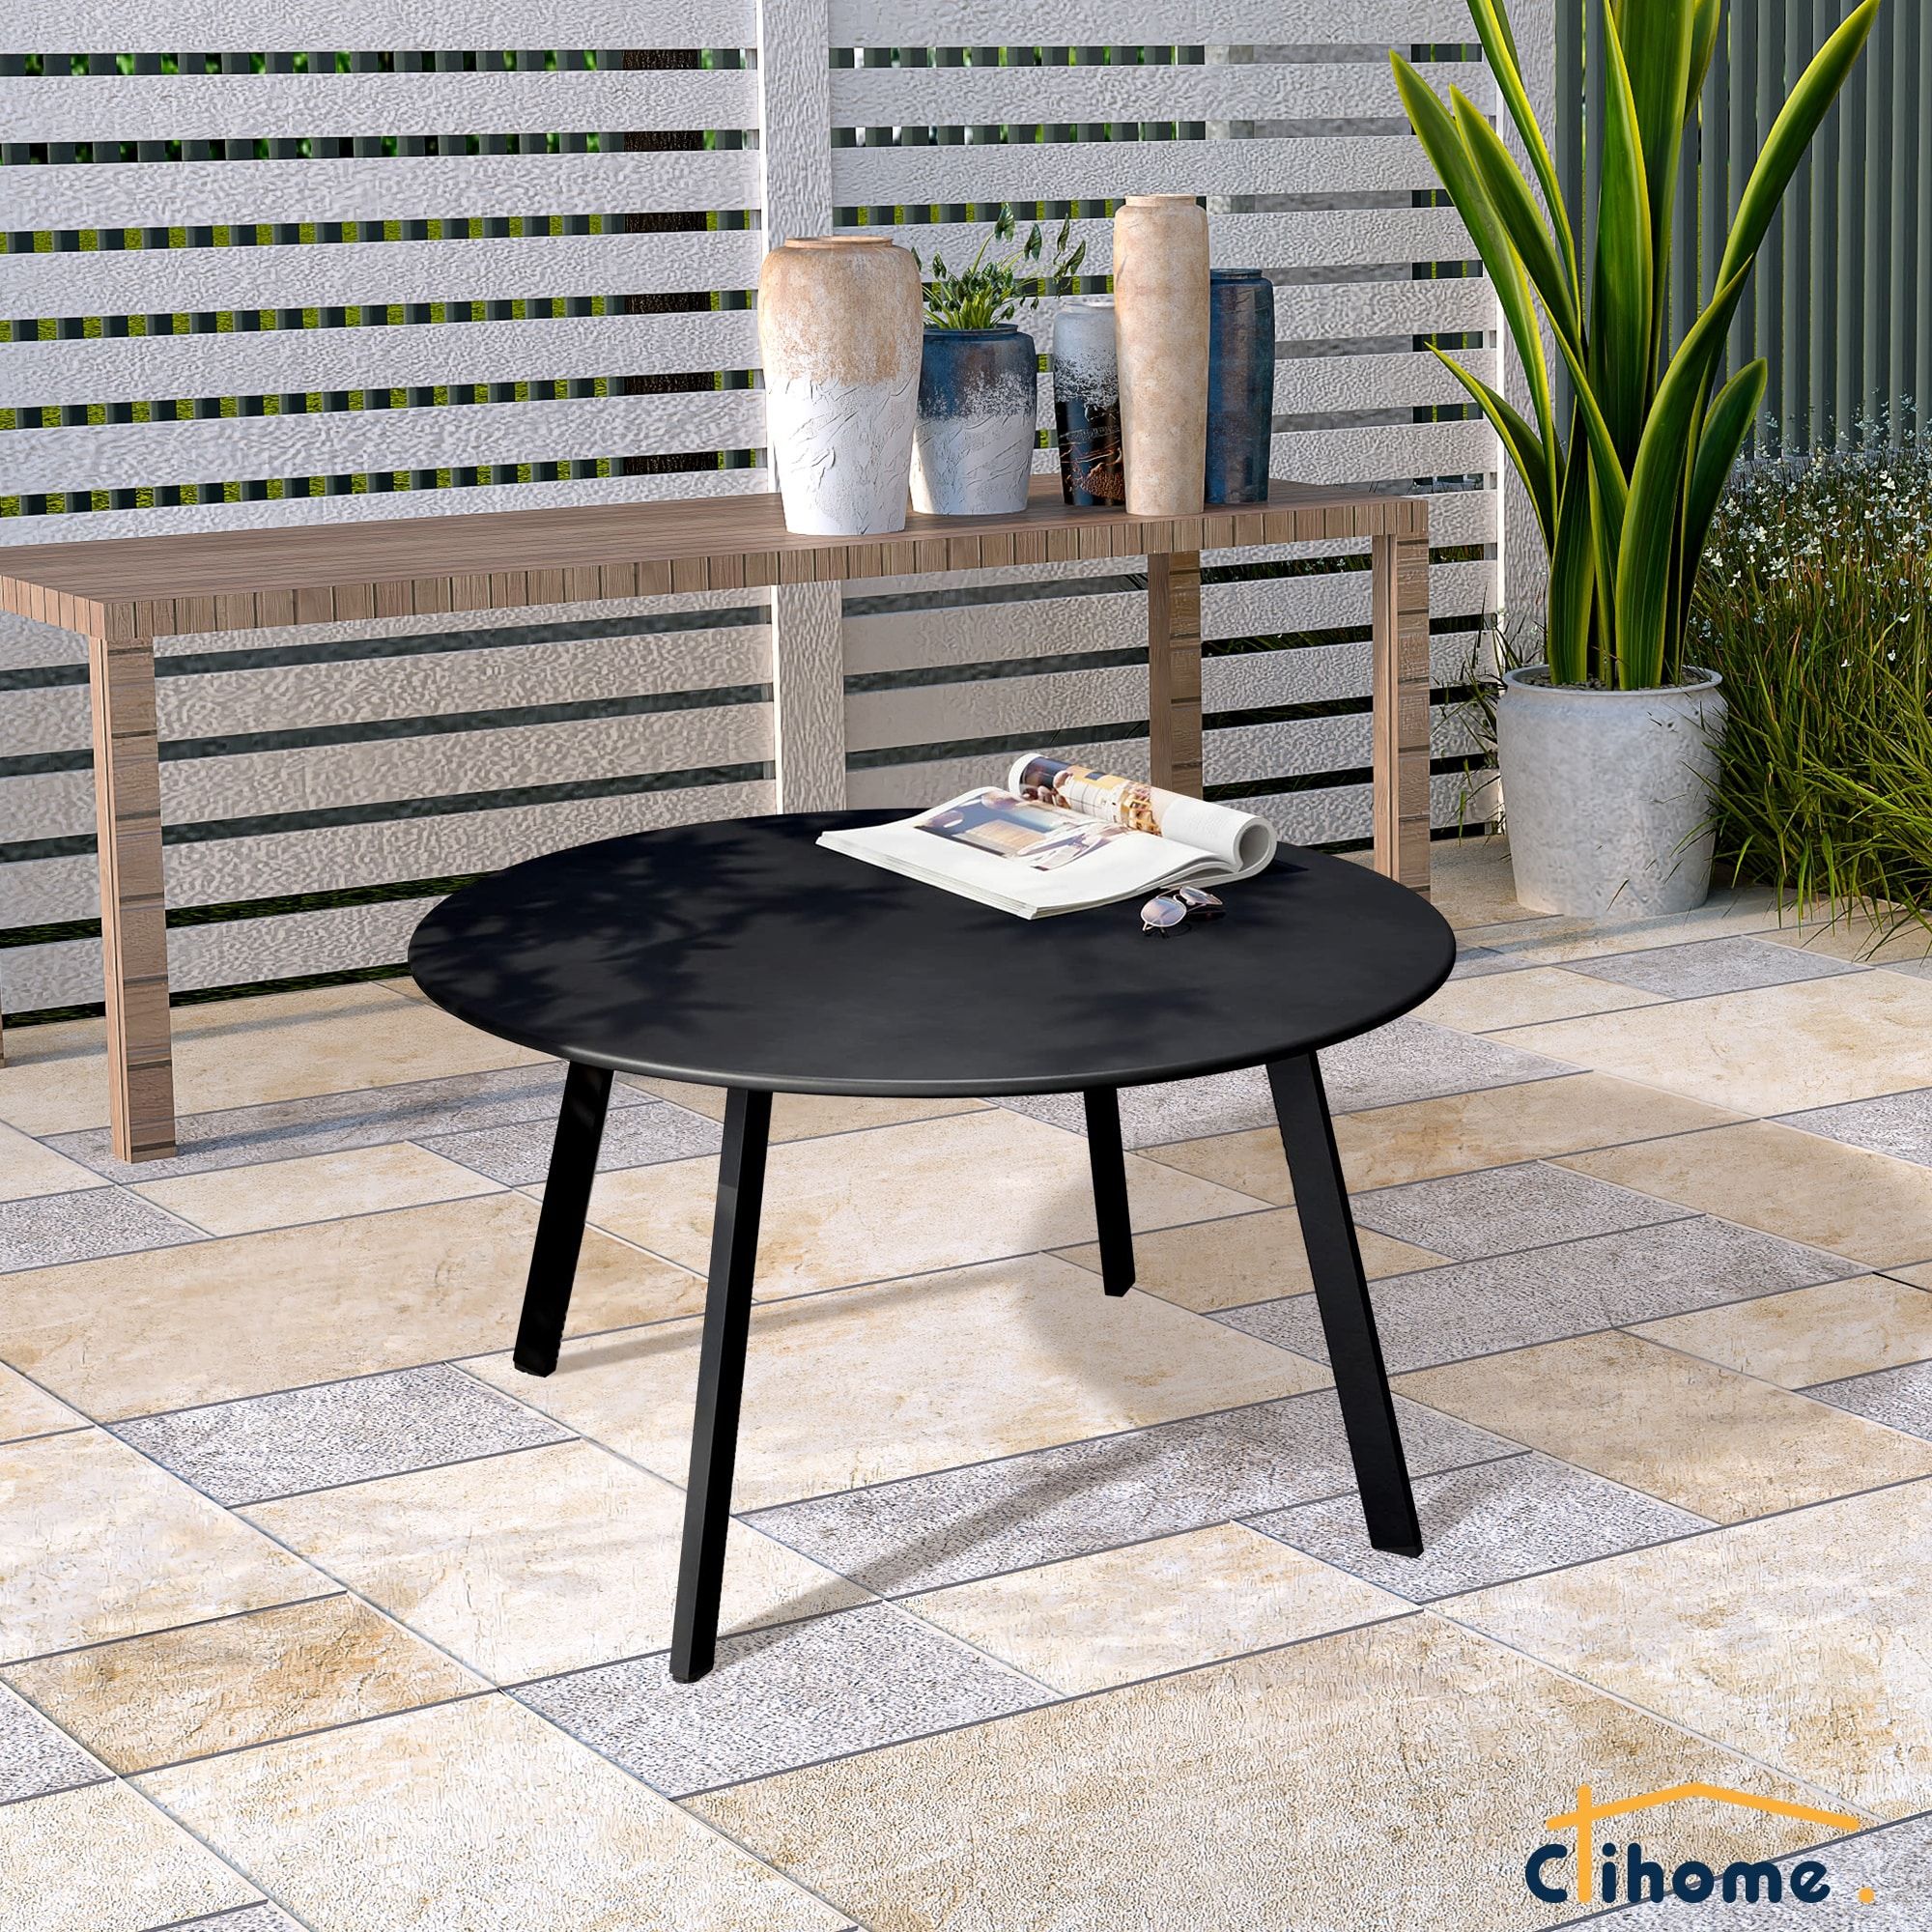 Clihome Weather Resistant Round Steel Patio Large Coffee Table – On Sale –  Bed Bath & Beyond – 36089720 Pertaining To Round Steel Patio Coffee Tables (Photo 3 of 15)